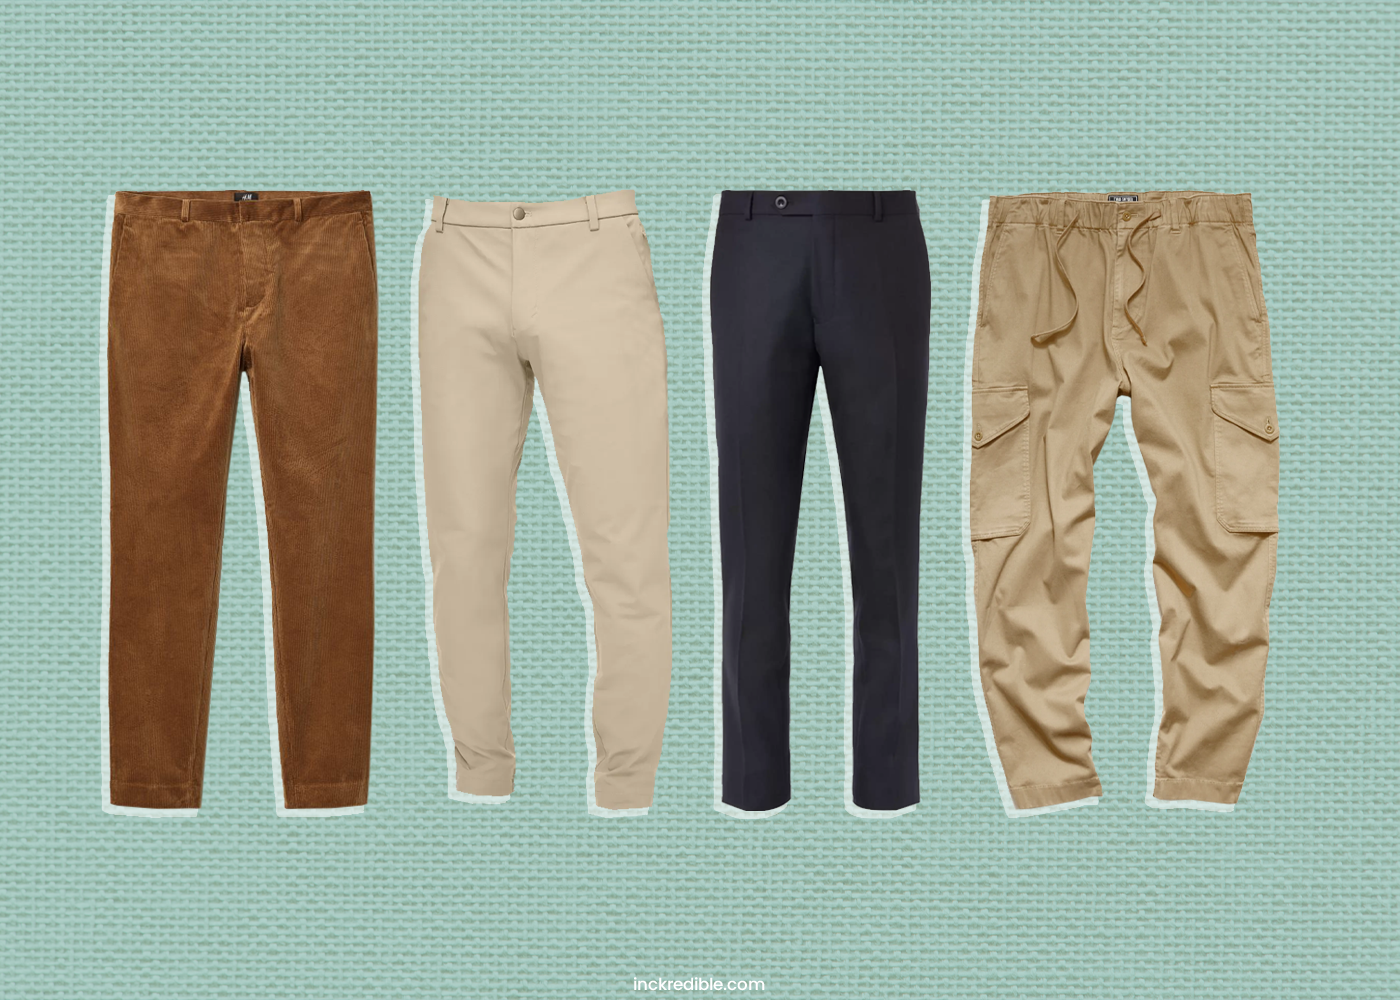 17 Different Types of Pants Every Men Should Consider Wearing - Inckredible